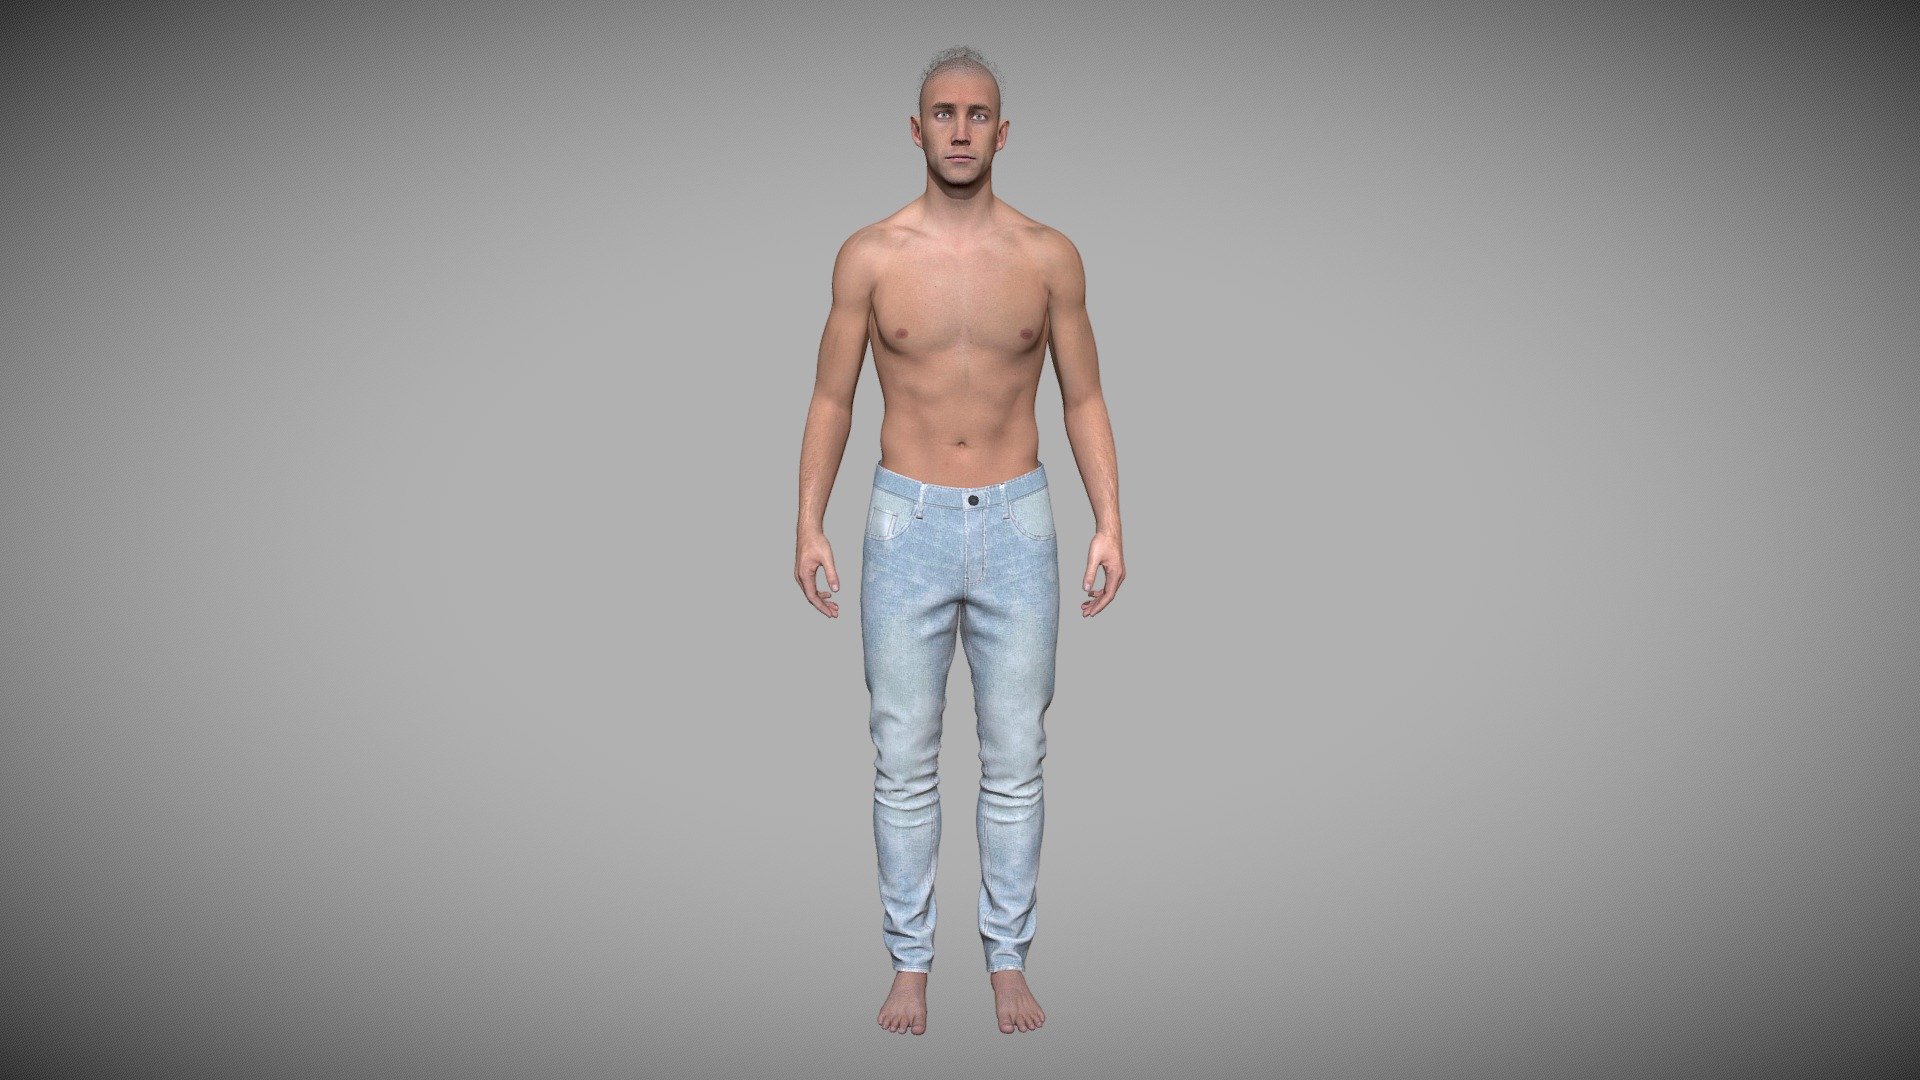 Cloth Title = Men's Casual Denim Pant with CC4 Kevin

Model = CC4 Kevin 

Pose =  Stand Pose M 

SKU = DG100151 

Product Type = Denim  

Cloth Length = Regular  

Body Fit = Slim Fit 

Occasion = Outerwear 

Waist Rise = Mid Rise 


Our Services:

3D Apparel Design.

OBJ,FBX,GLTF Making with High/Low Poly.

Fabric Digitalization.

Mockup making.

3D Teck Pack.

Pattern Making.

2D Illustration.

Cloth Animation and 360 Spin Video.


Contact us:- 

Email: info@digitalfashionwear.com 

Website: https://digitalfashionwear.com 


We designed all the types of cloth specially focused on product visualization, e-commerce, fitting, and production. 

We will design: 

T-shirts 

Polo shirts 

Hoodies 

Sweatshirt 

Jackets 

Shirts 

TankTops 

Trousers 

Bras 

Underwear 

Blazer 

Aprons 

Leggings 

and All Fashion items. 




Our goal is to make sure what we provide you, meets your demand 3d model